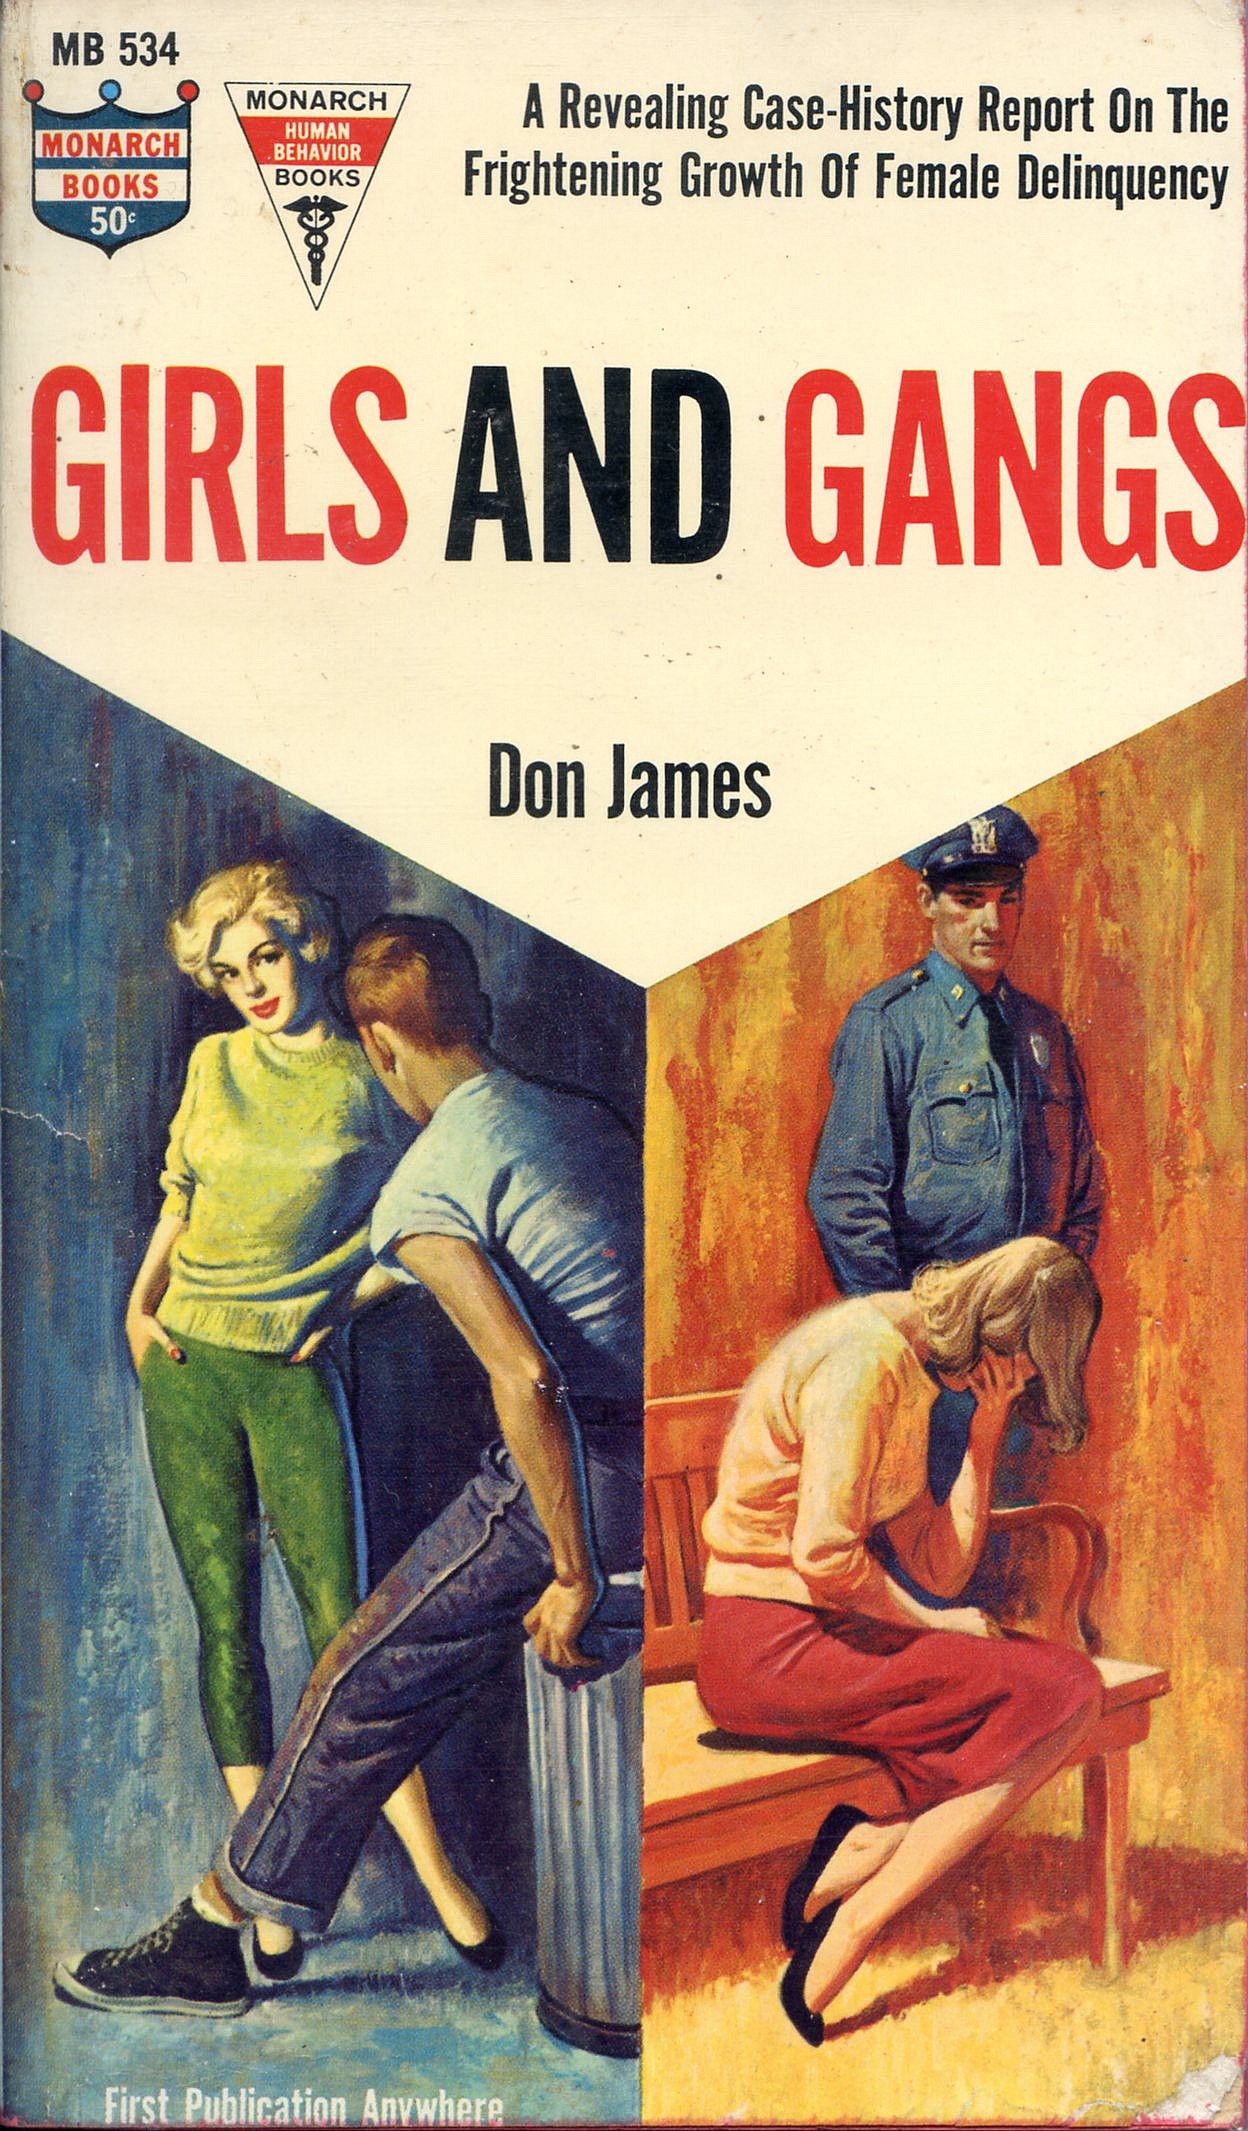 Delinquents Page 6 Pulp Covers